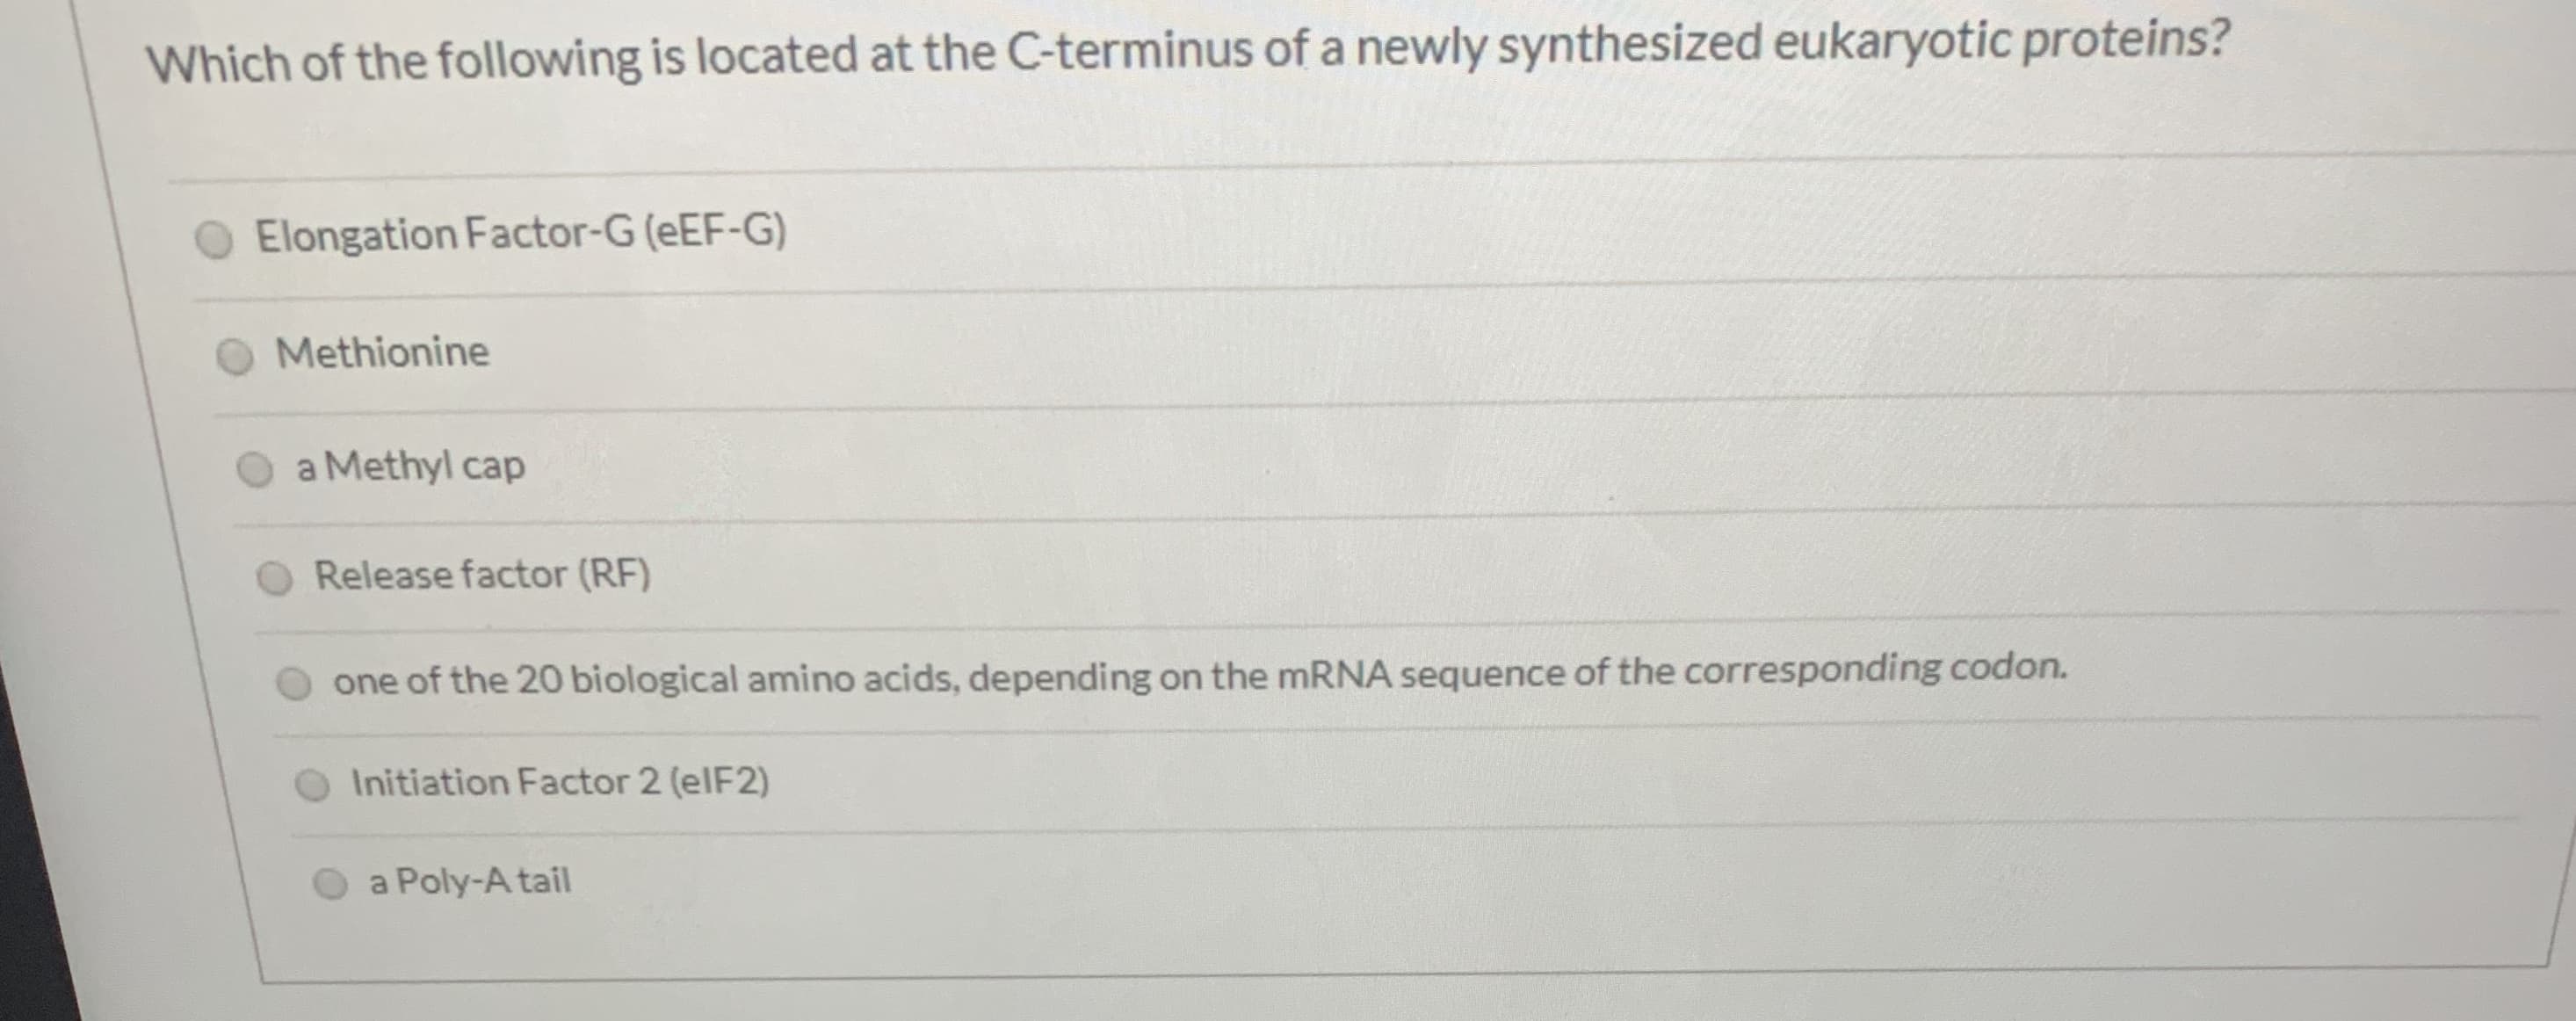 Which of the following is located at the C-terminus of a newly synthesized eukaryotic proteins?
Elongation Factor-G (eEF-G)
Methionine
a Methyl cap
Release factor (RF)
one of the 20 biological amino acids, depending on the mRNA sequence of the corresponding codon.
Initiation Factor 2 (elF2)
a Poly-A tail
